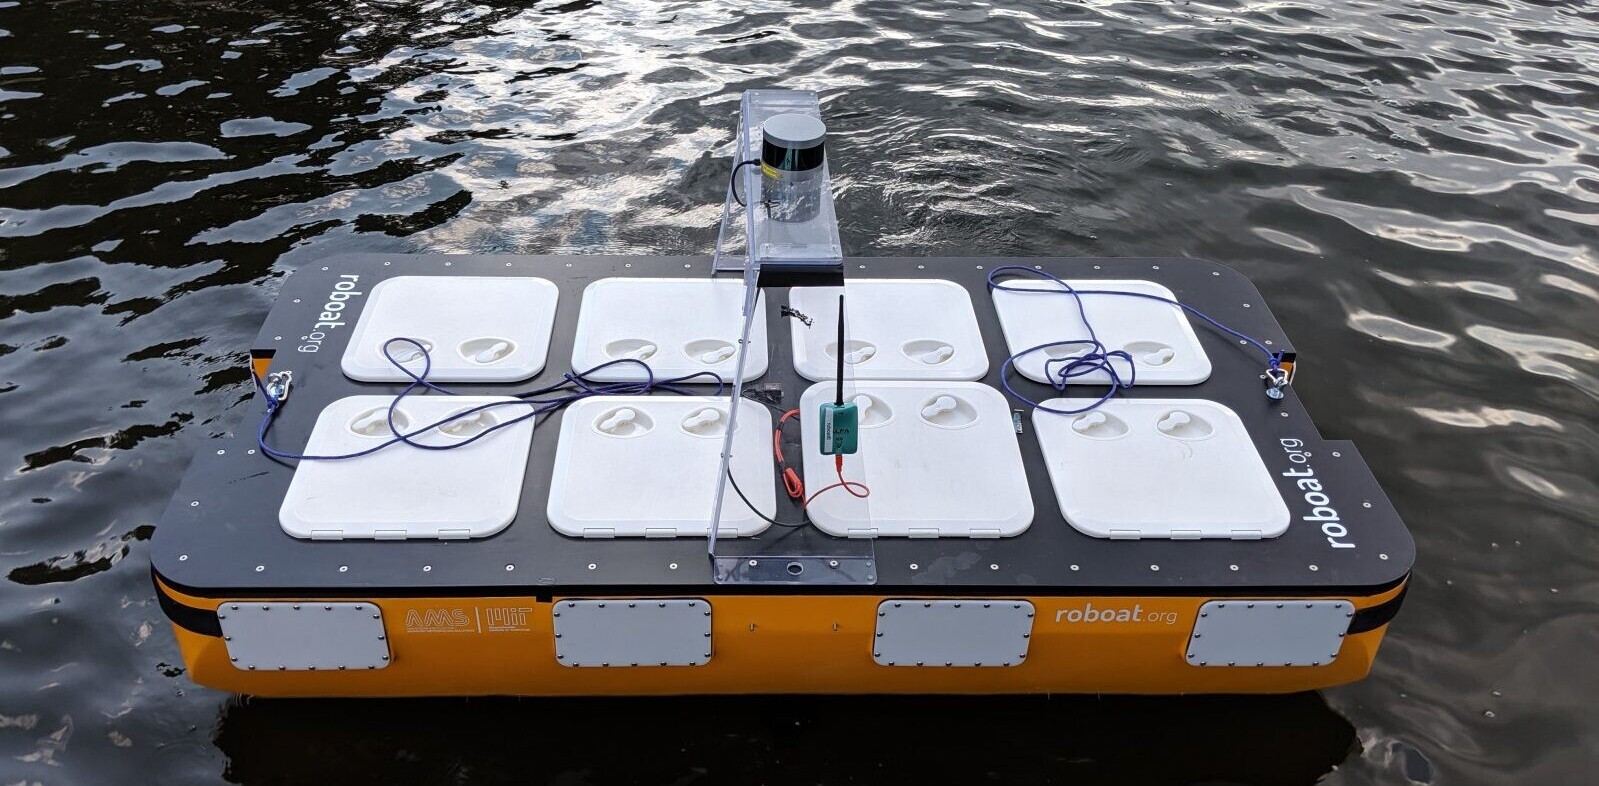 MIT’s new autonomous boat ruled Amsterdam’s canals for 3 hours